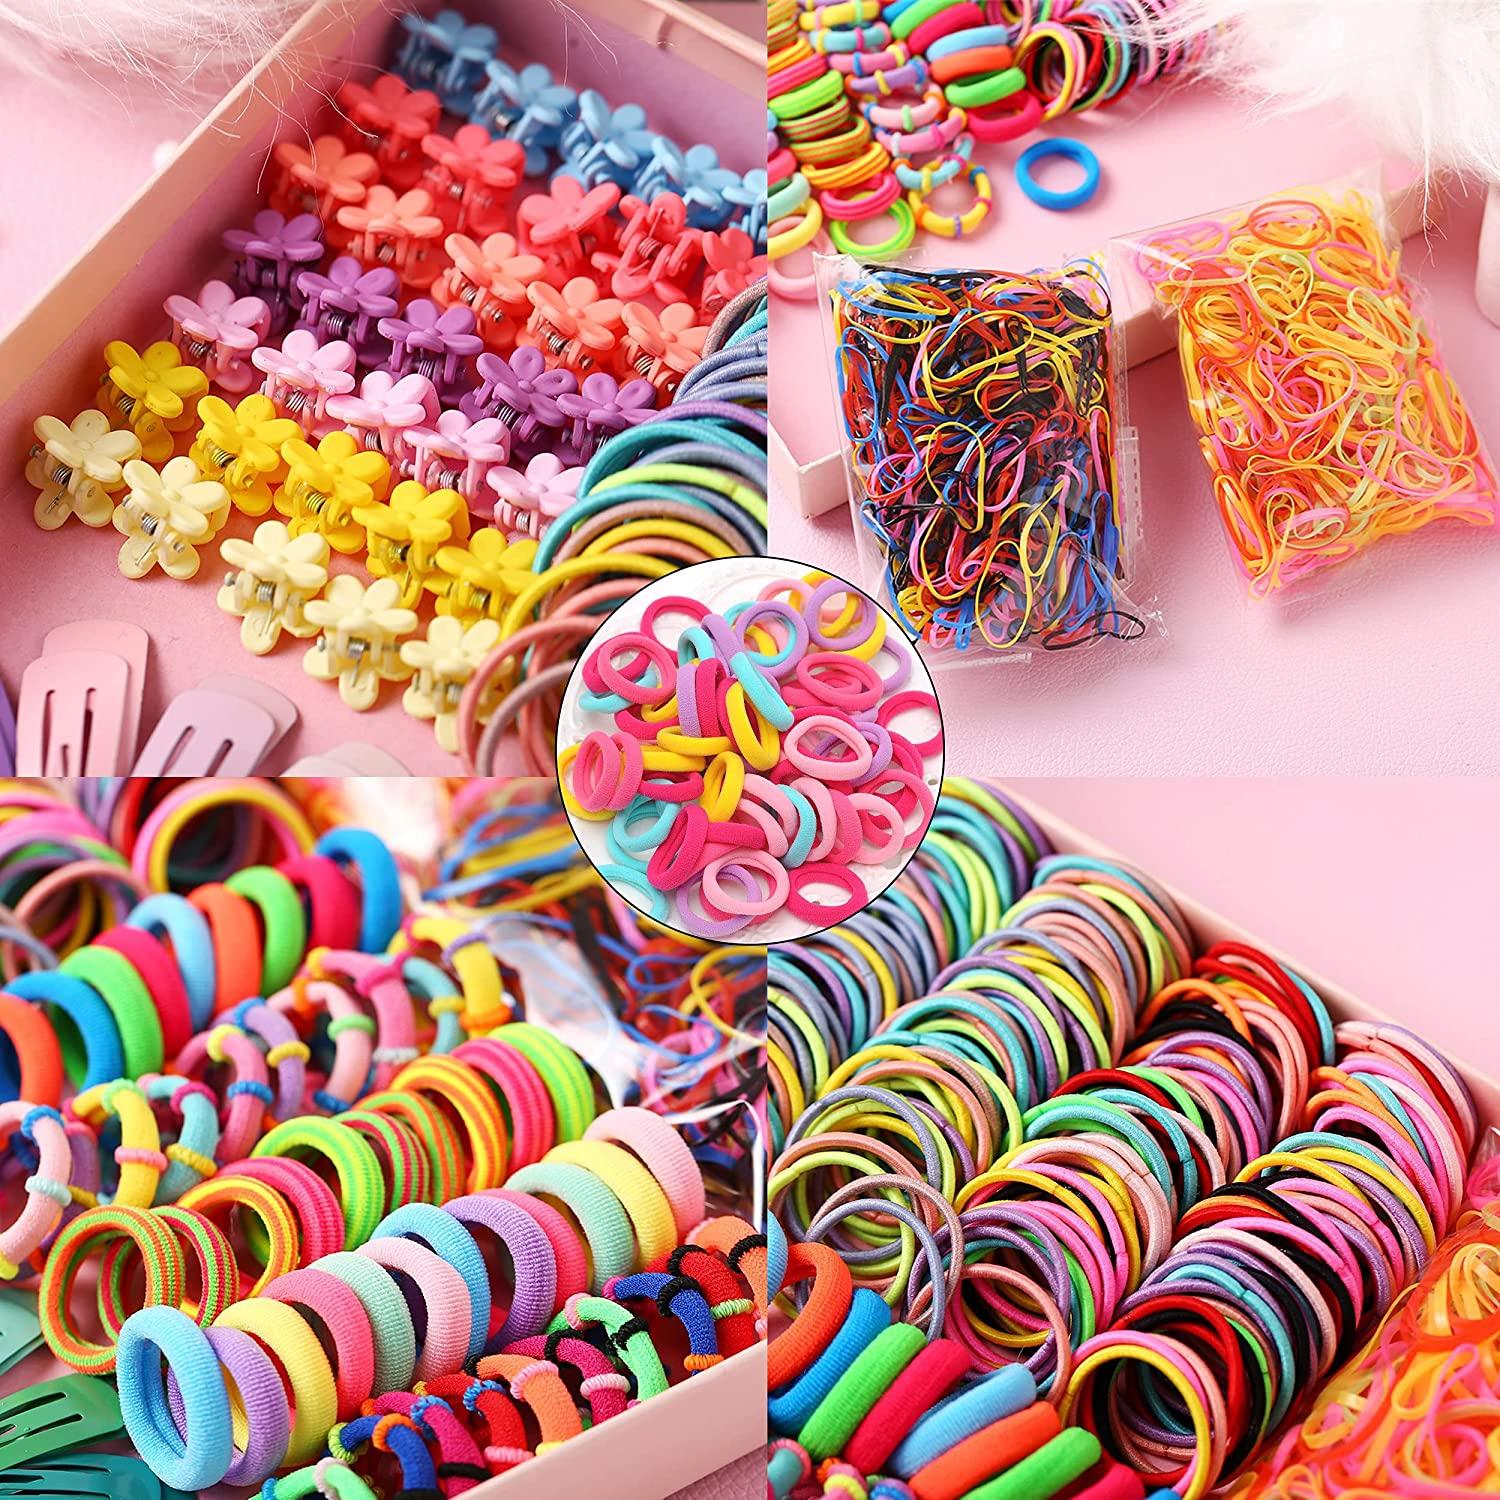 780PCS Color Clear Elastic Hair Bands Clips Mini Hair Claw Clips Rubber  Bands Hair Ties Kit with Box for Girls Teens Children